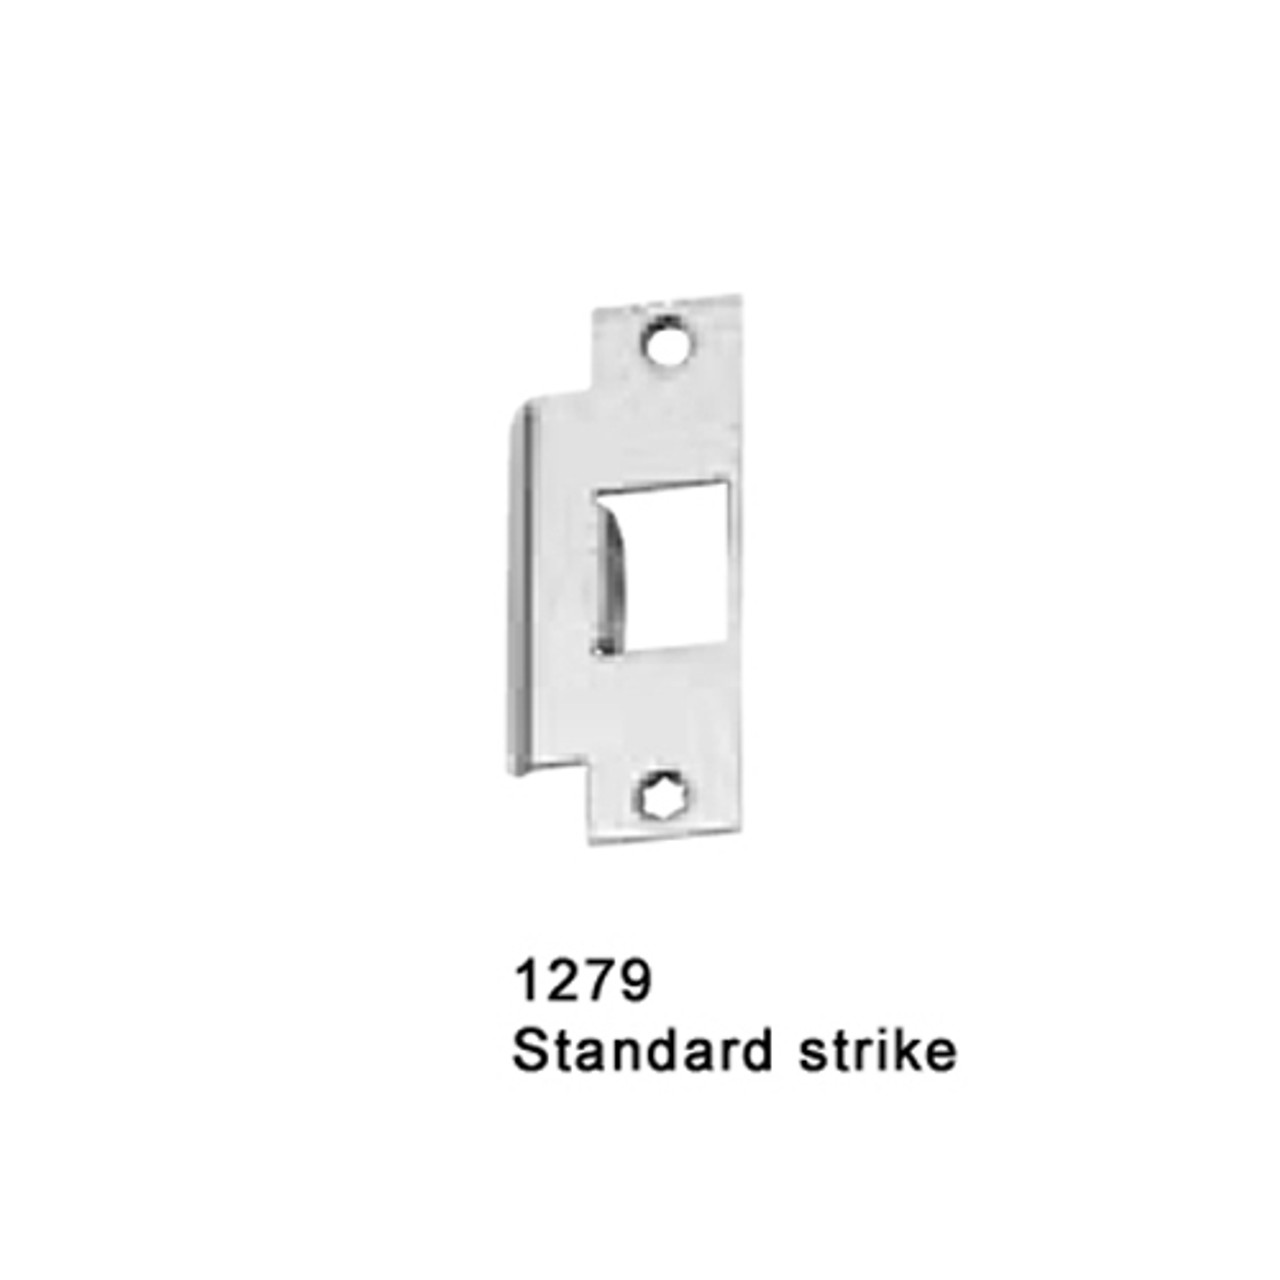 CD25-M-TP-US26-3-RHR Falcon 25 Series Mortise Lock Devices with 512TP Thumbpiece Trim in Polished Chrome